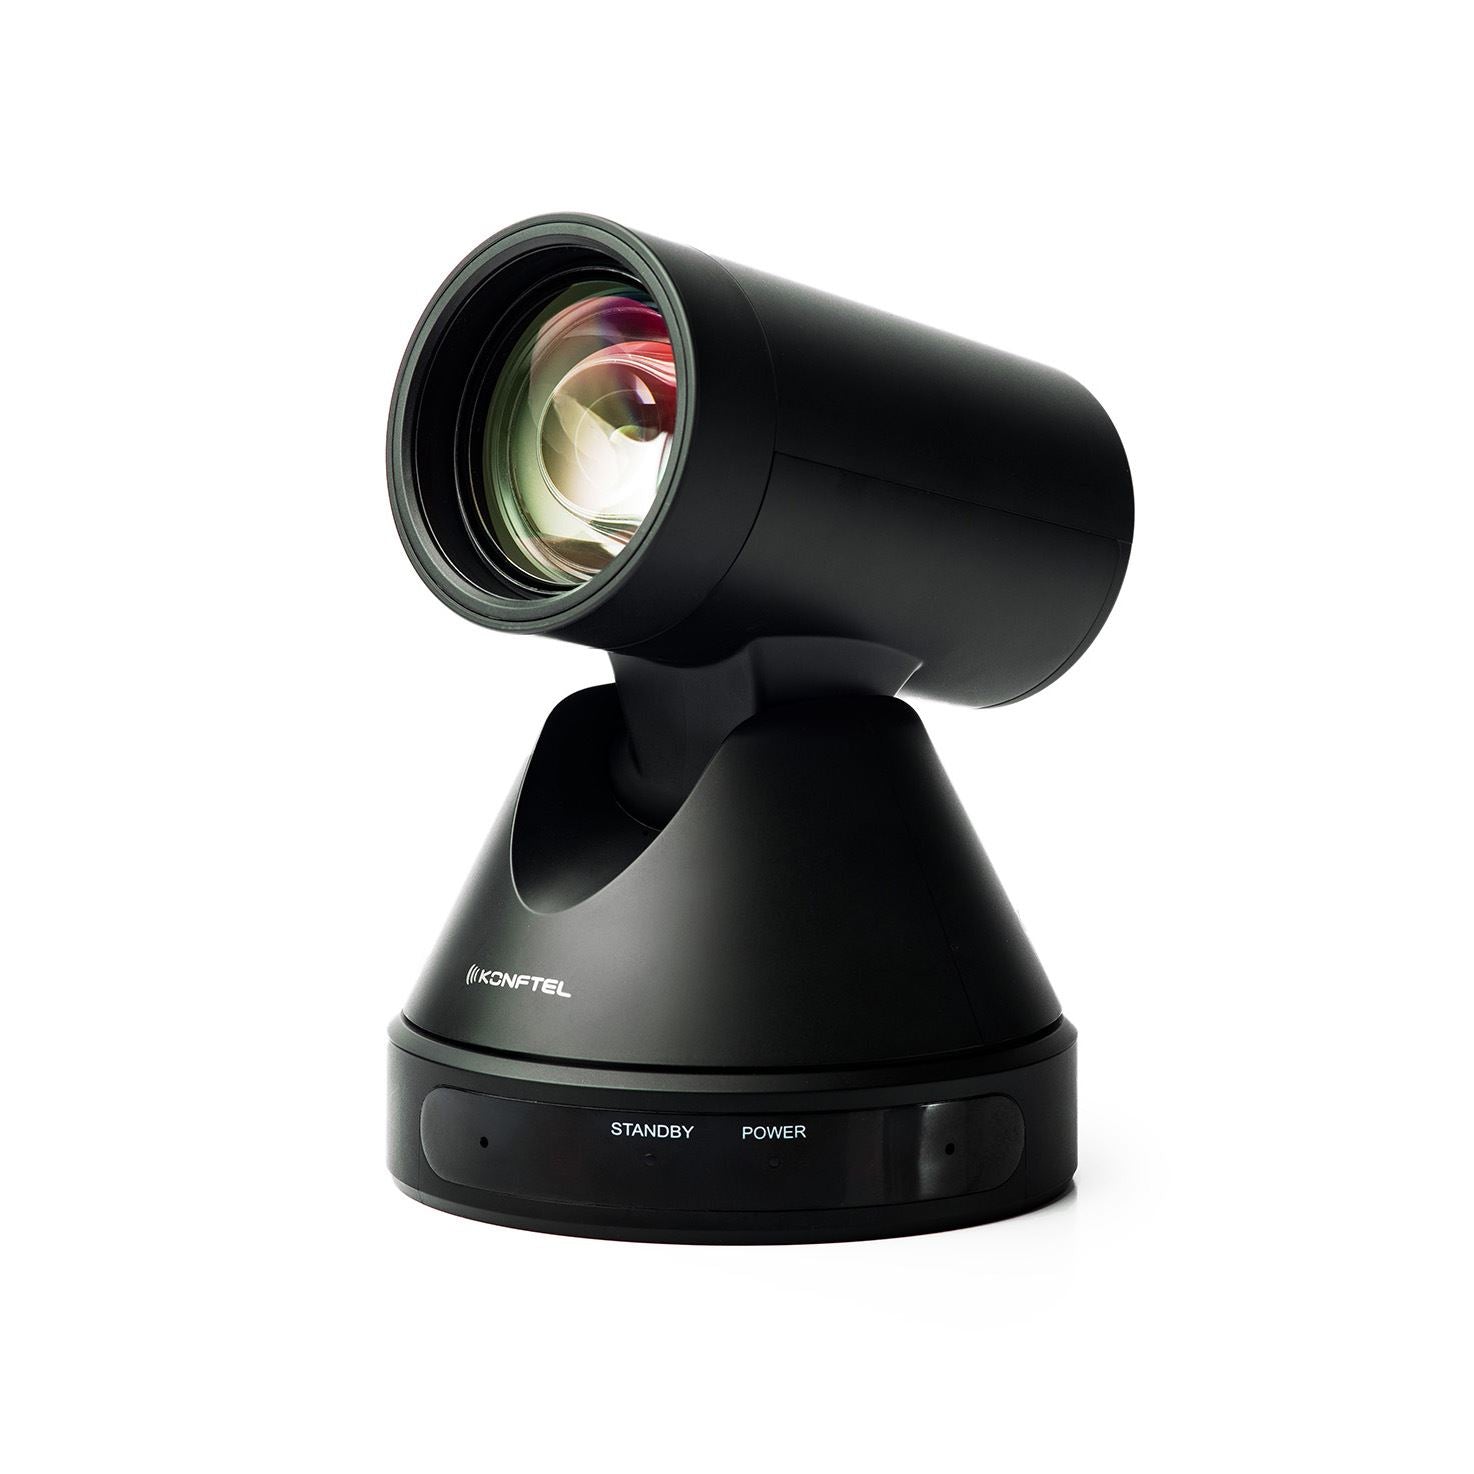 KONFTEL_CAM50_USB_PTZ_Conference_Camera._HD_1080p_60fps,_12x_Optical_Zoom,_USB_3.0,_Design_for_up_to_12_People._Includes_Remote_control._Various_Installation_Options._Wall_Bracket_Included.